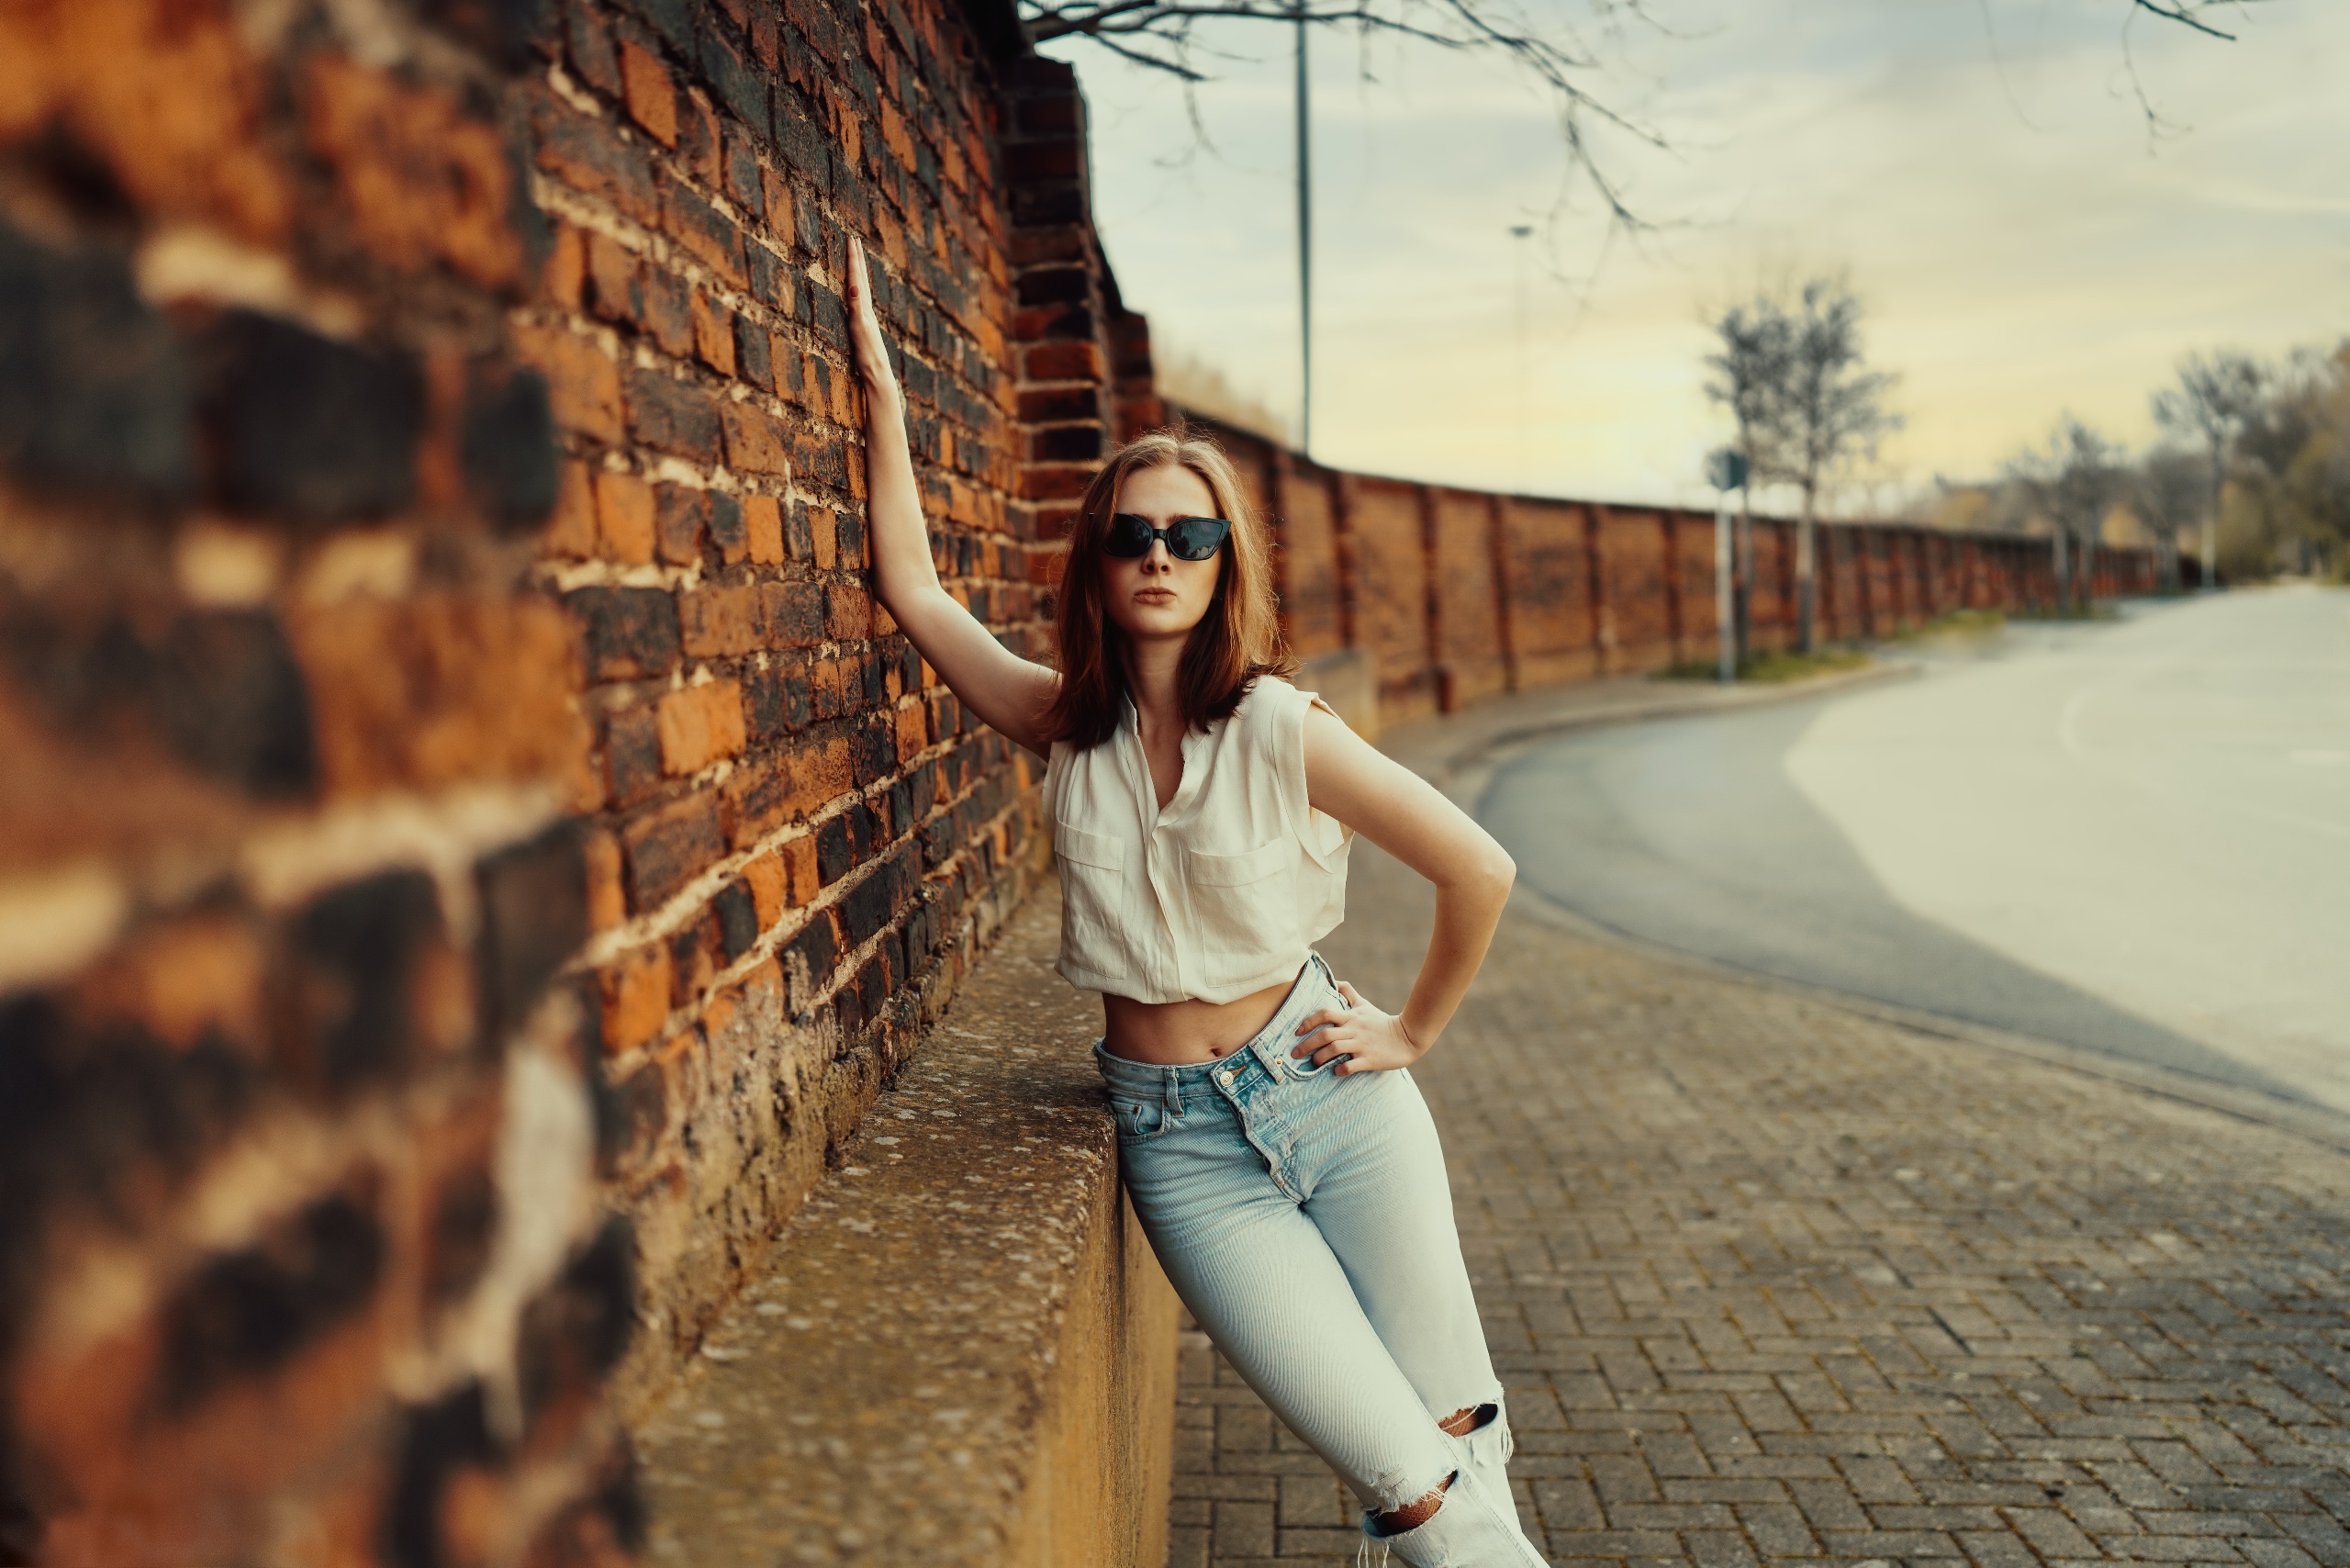 Women Urban Outdoors Women Outdoors Leaning Wall Bricks Women With Shades Shades Torn Jeans Model Br 2560x1708